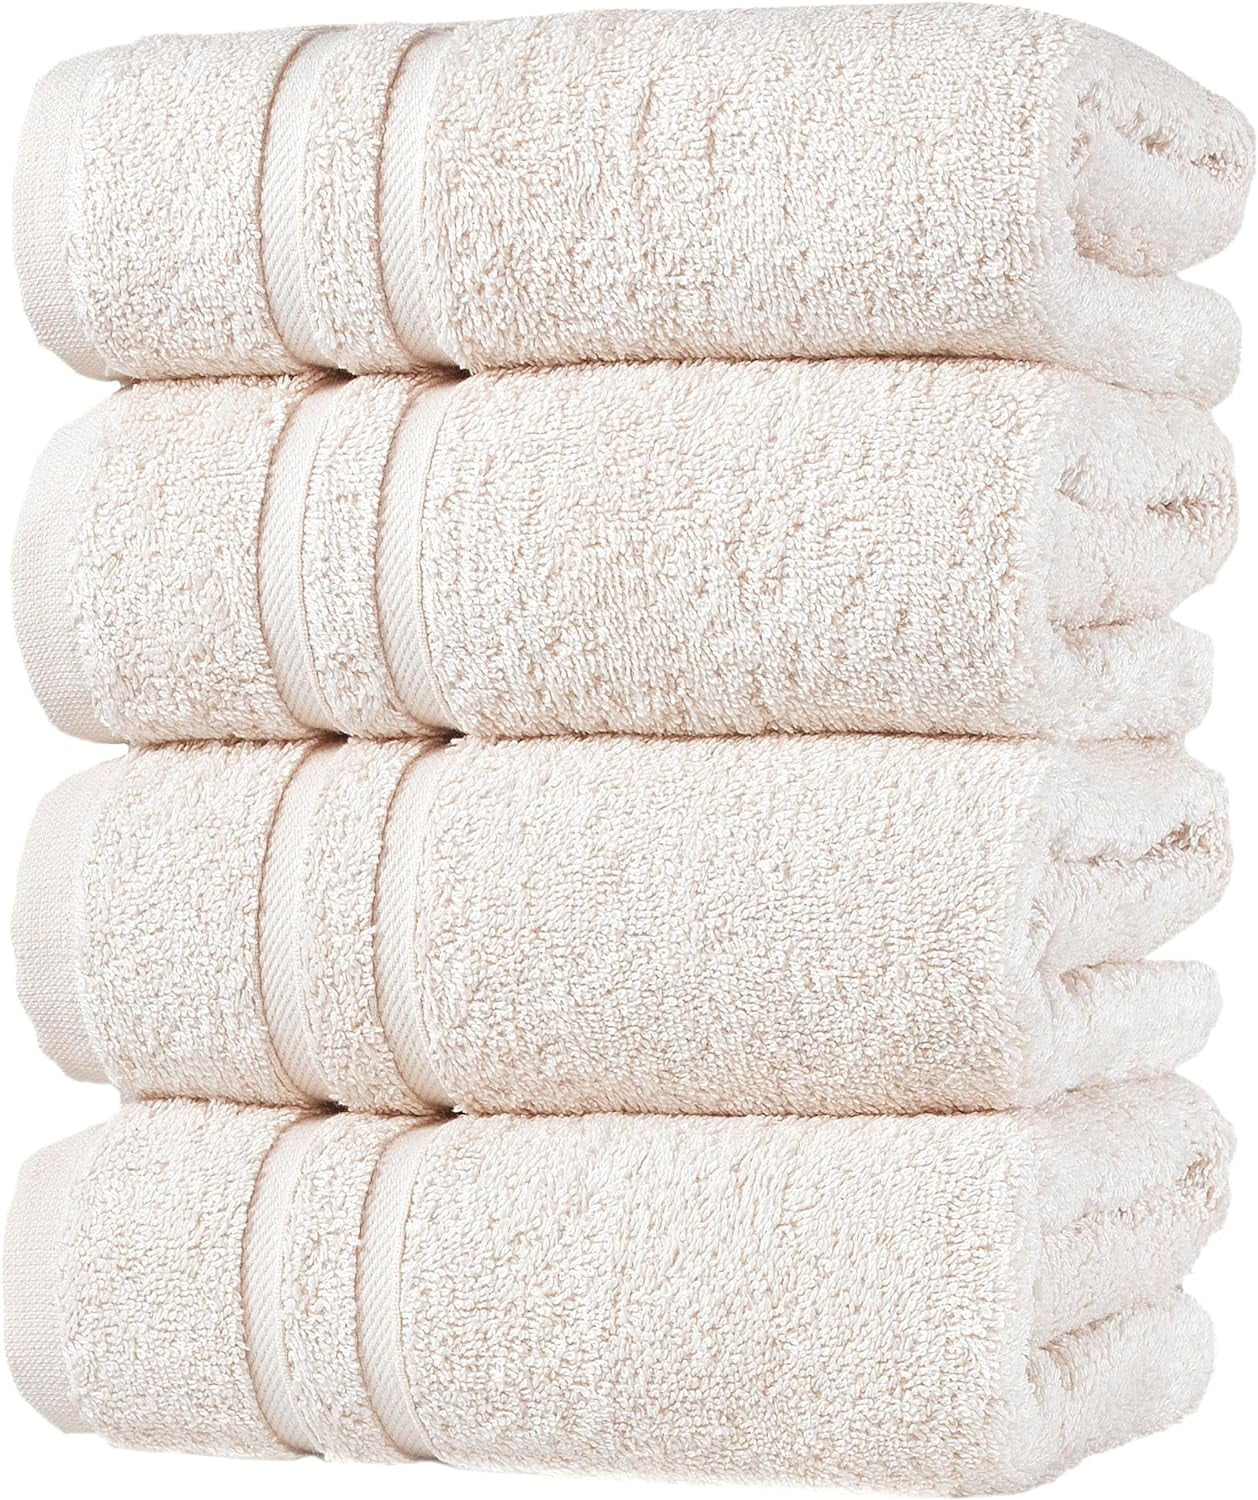 COTTON CRAFT Ultra Soft Hand Towel - Set of 6 Pure Cotton Plush Absorbent  Quick Dry Easy Care Bathroom Face Towel - Everyday Luxury Hotel Spa Gym